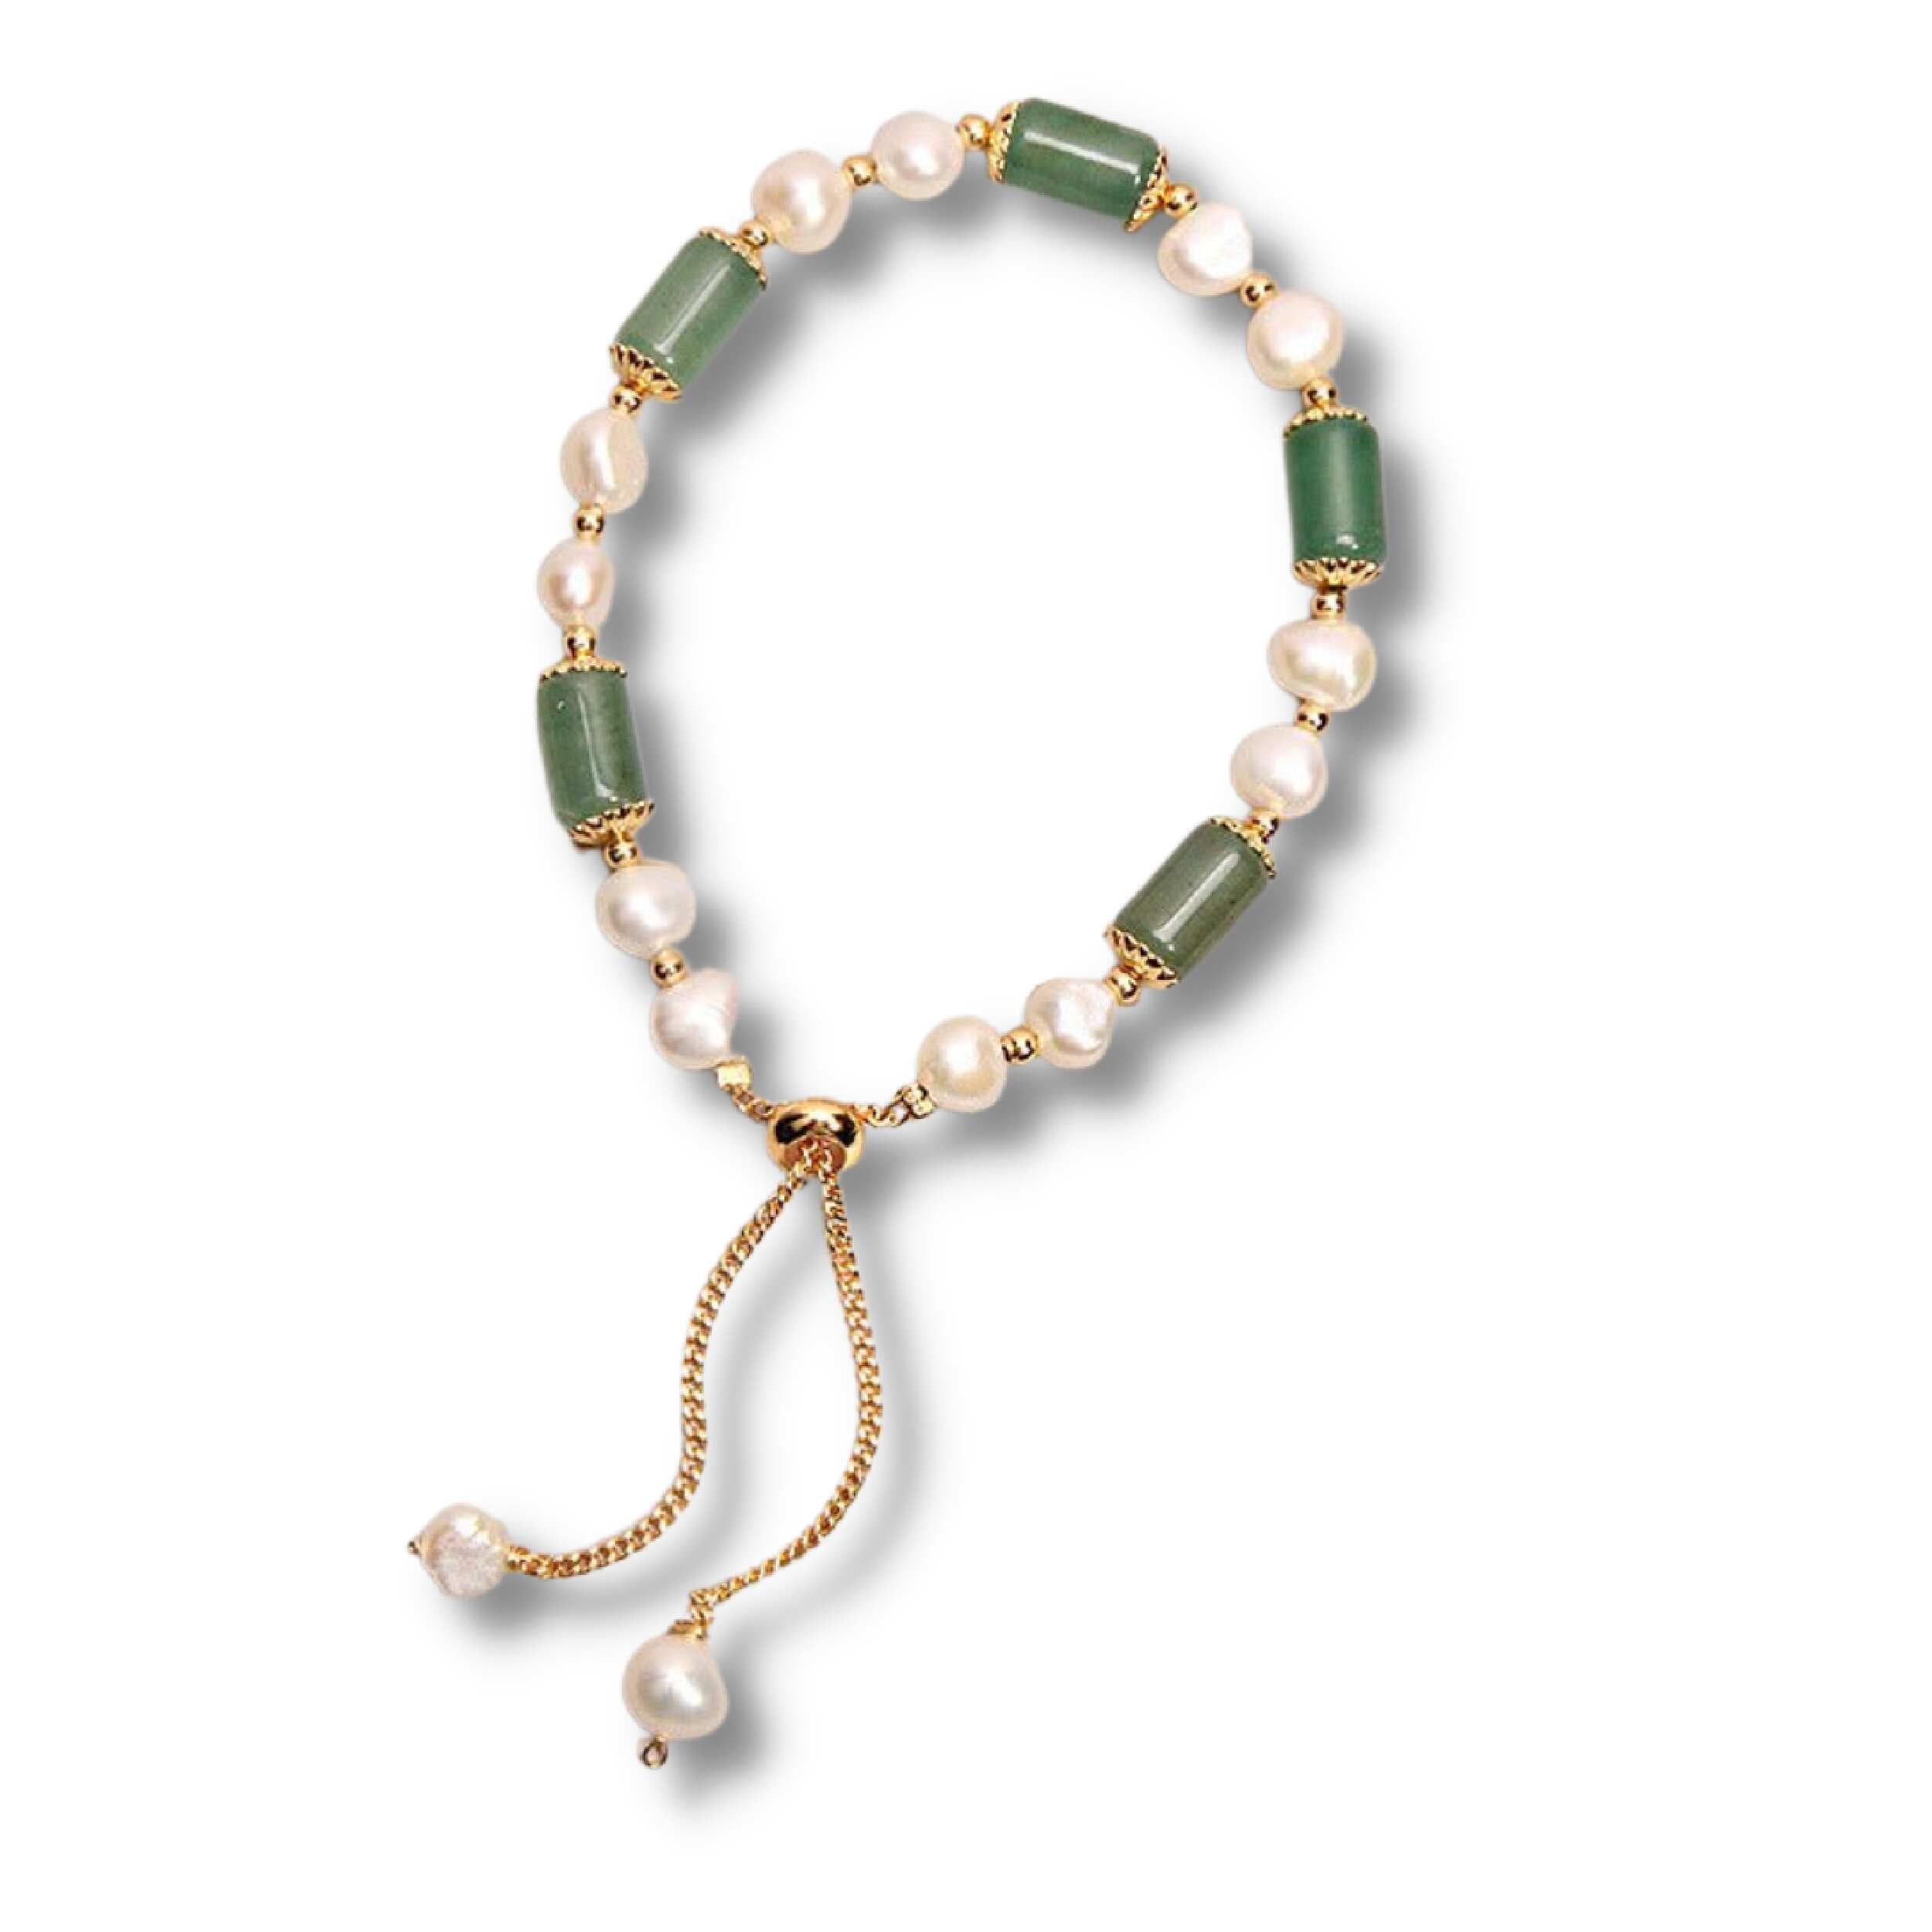 Green Aventurine Natural Crystal Bracelet with Pearls